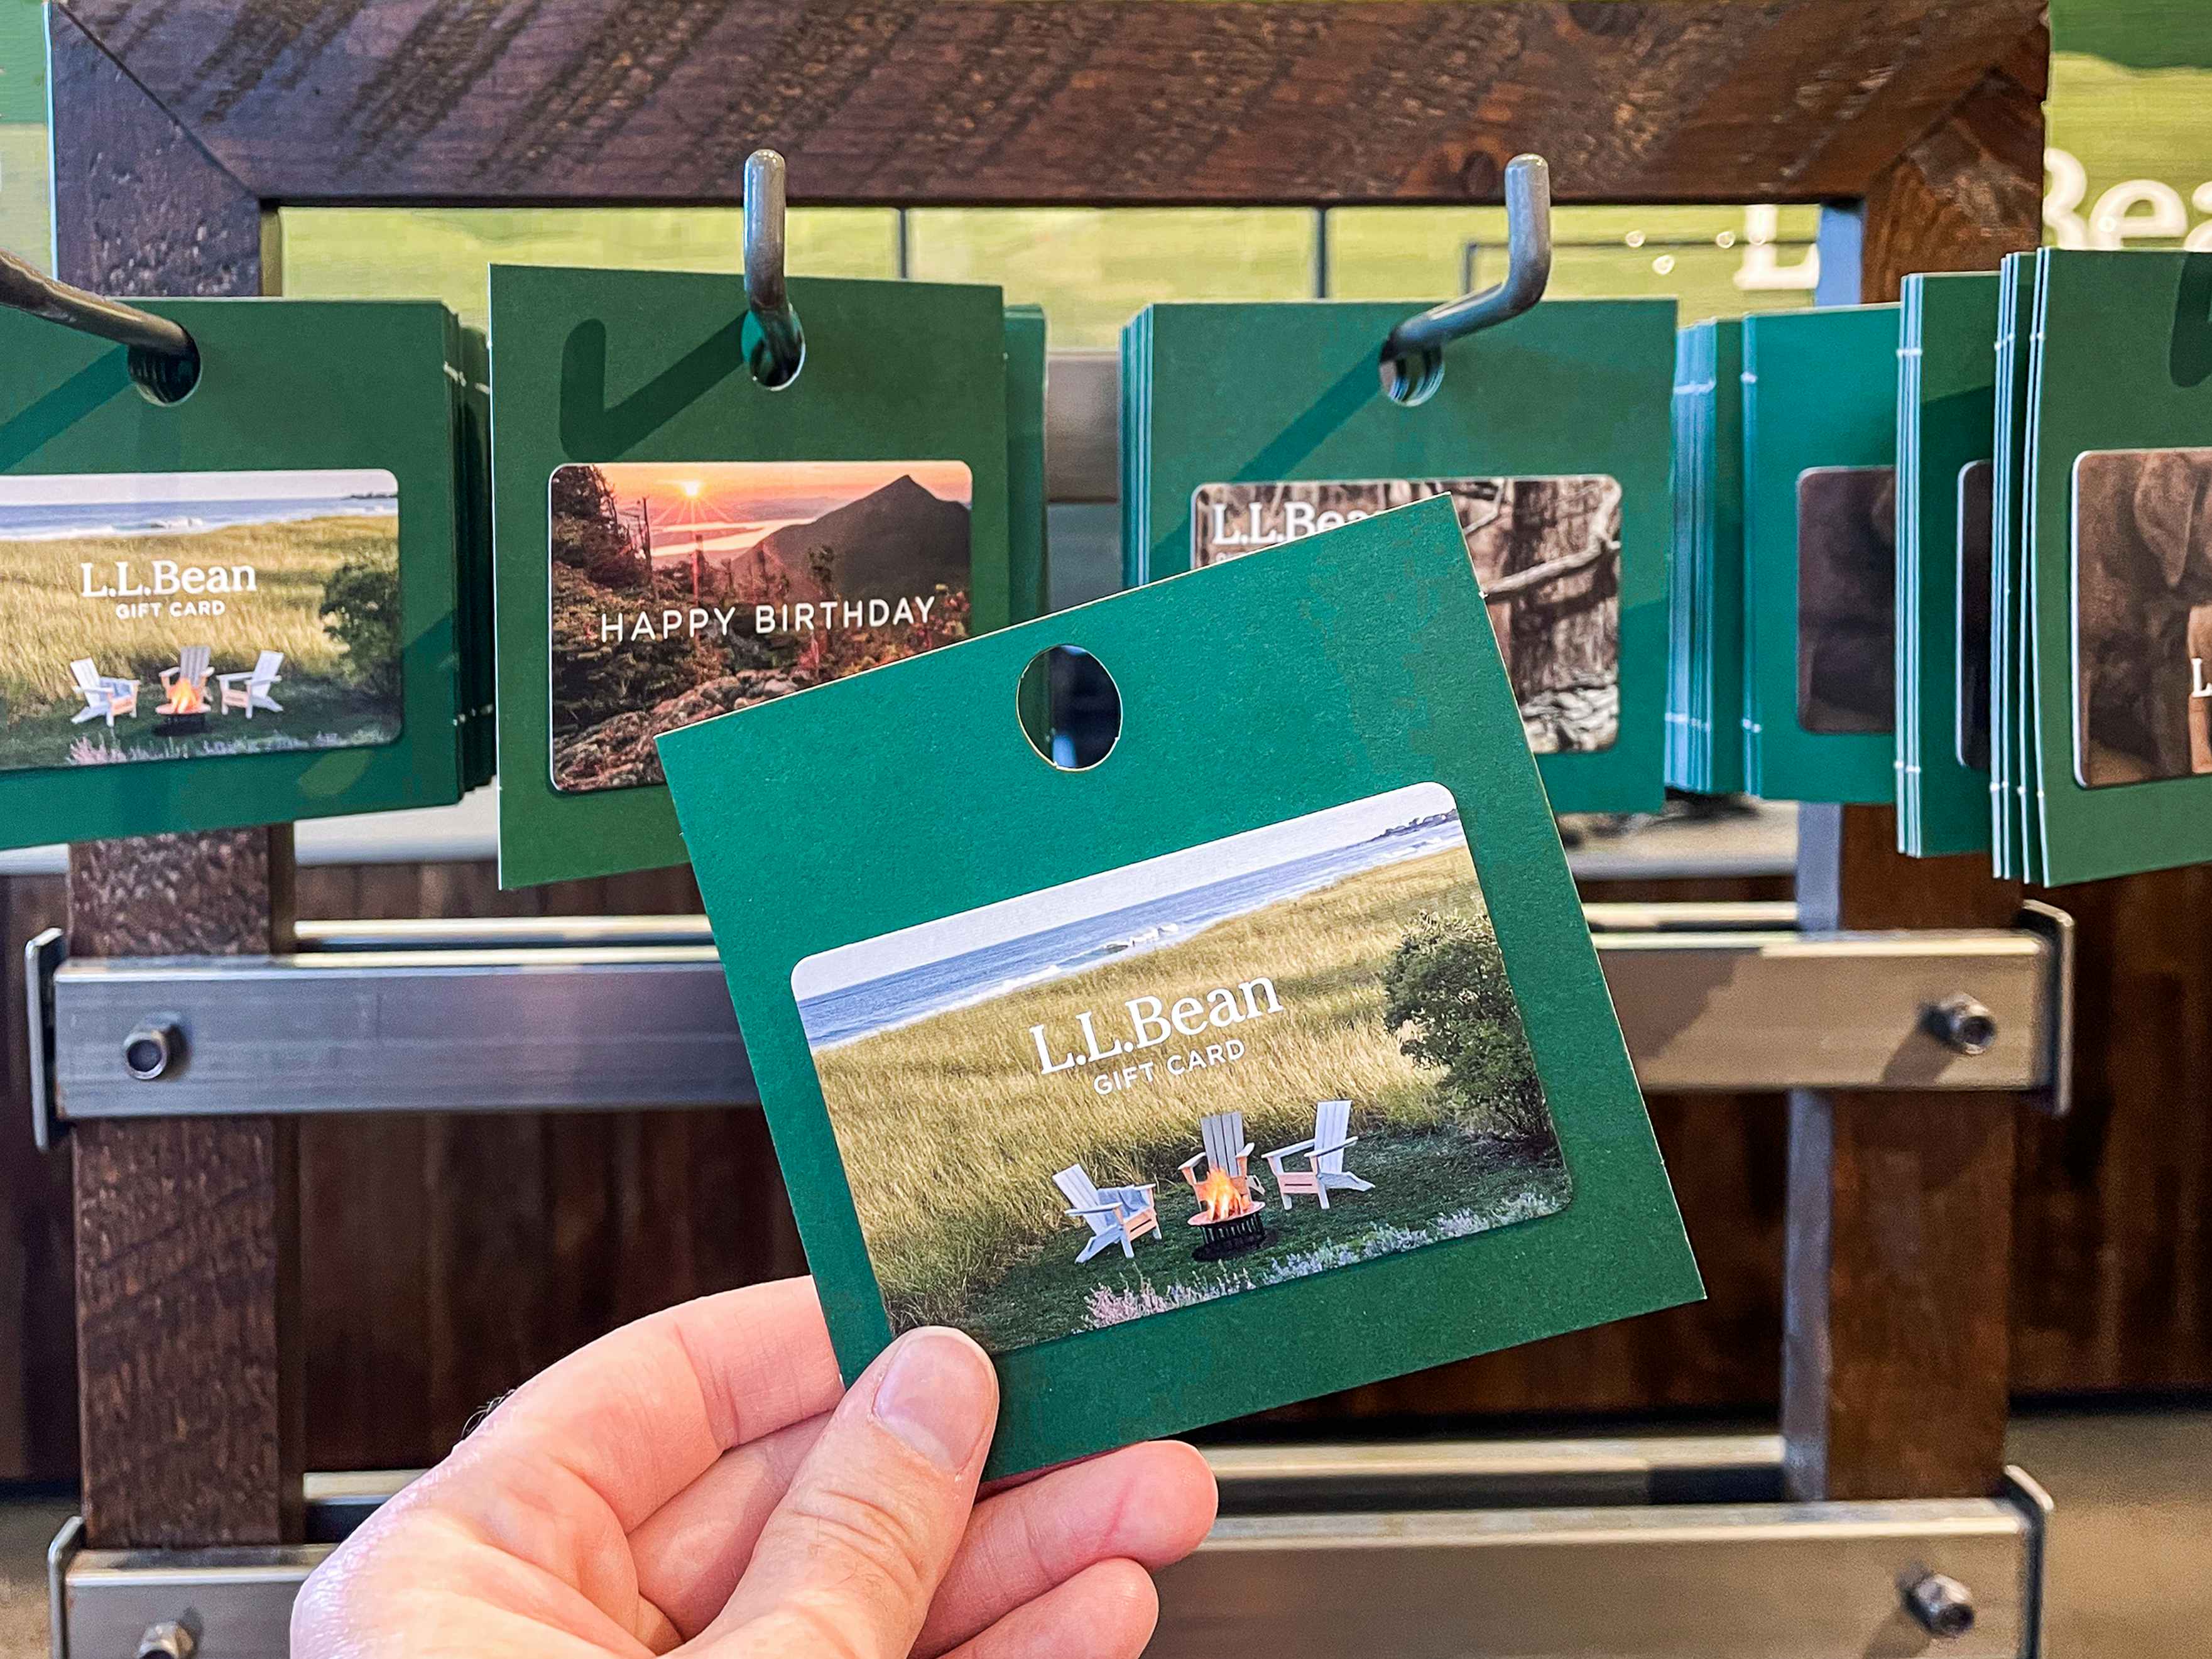 A person's hand holding a L.L.Bean gift card in front of a display of more L.L.Bean gift cards.